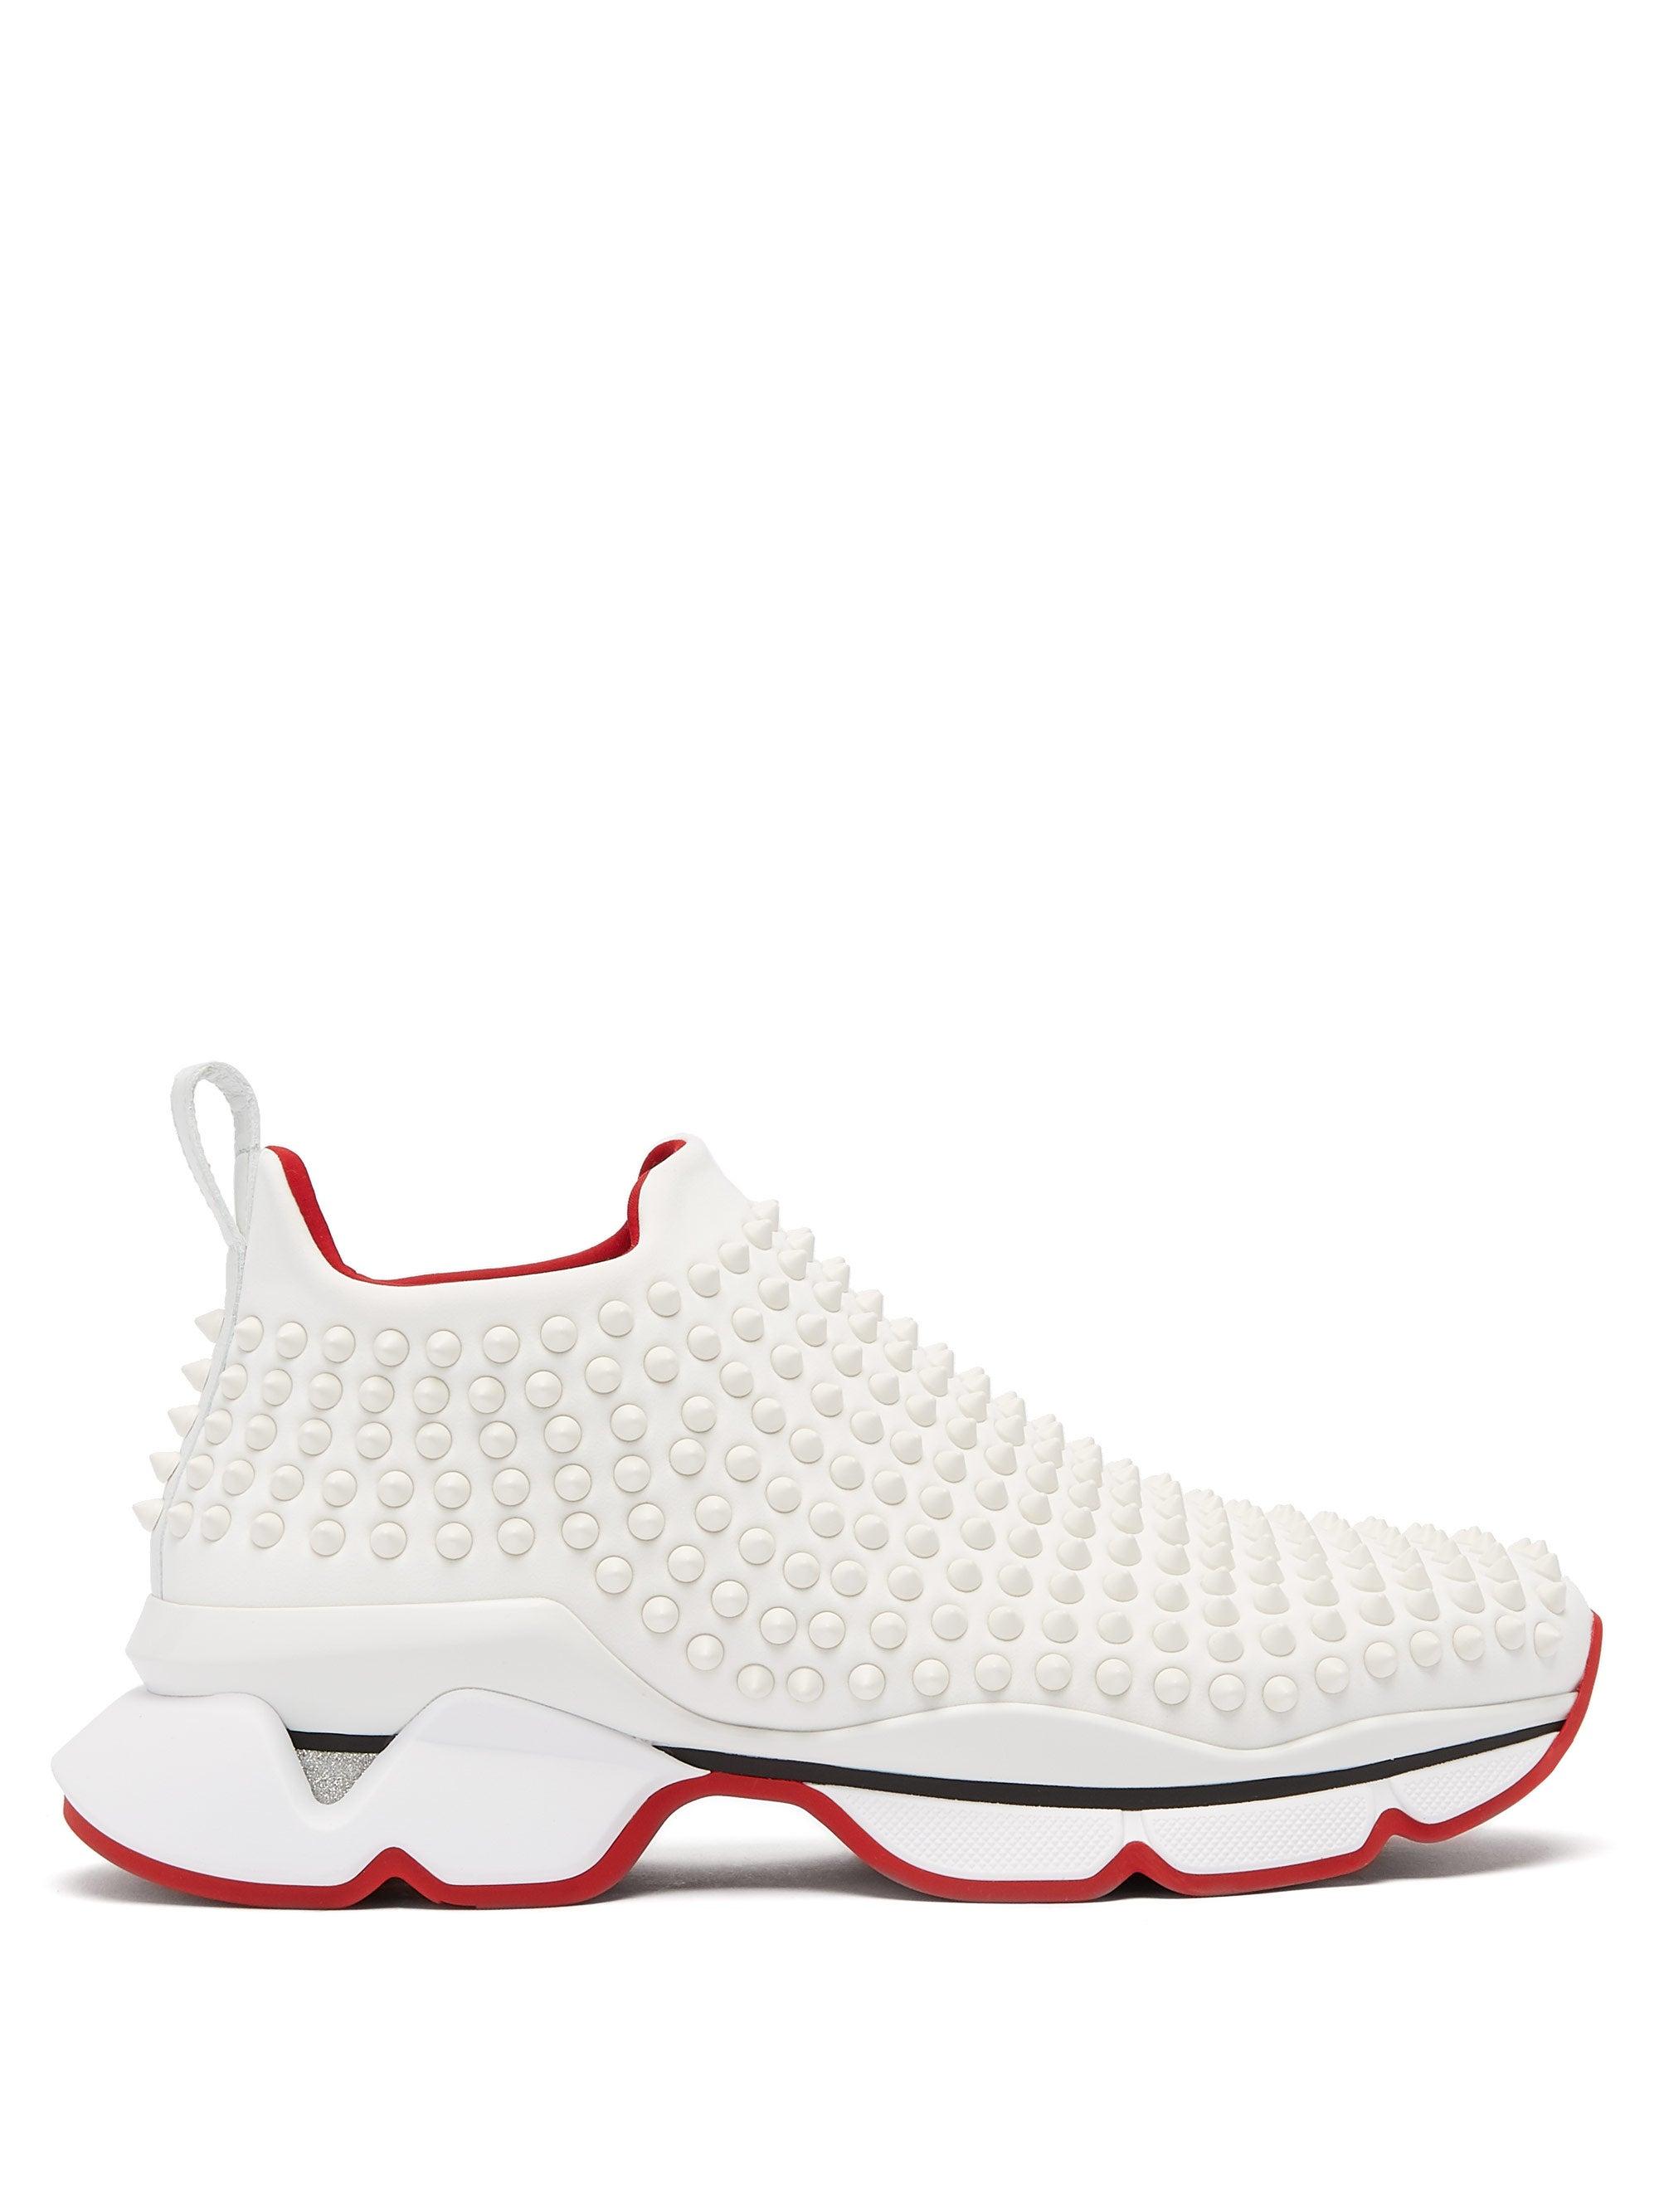 Christian Louboutin Spikes Donna Neoprene in White Save 58% - Lyst